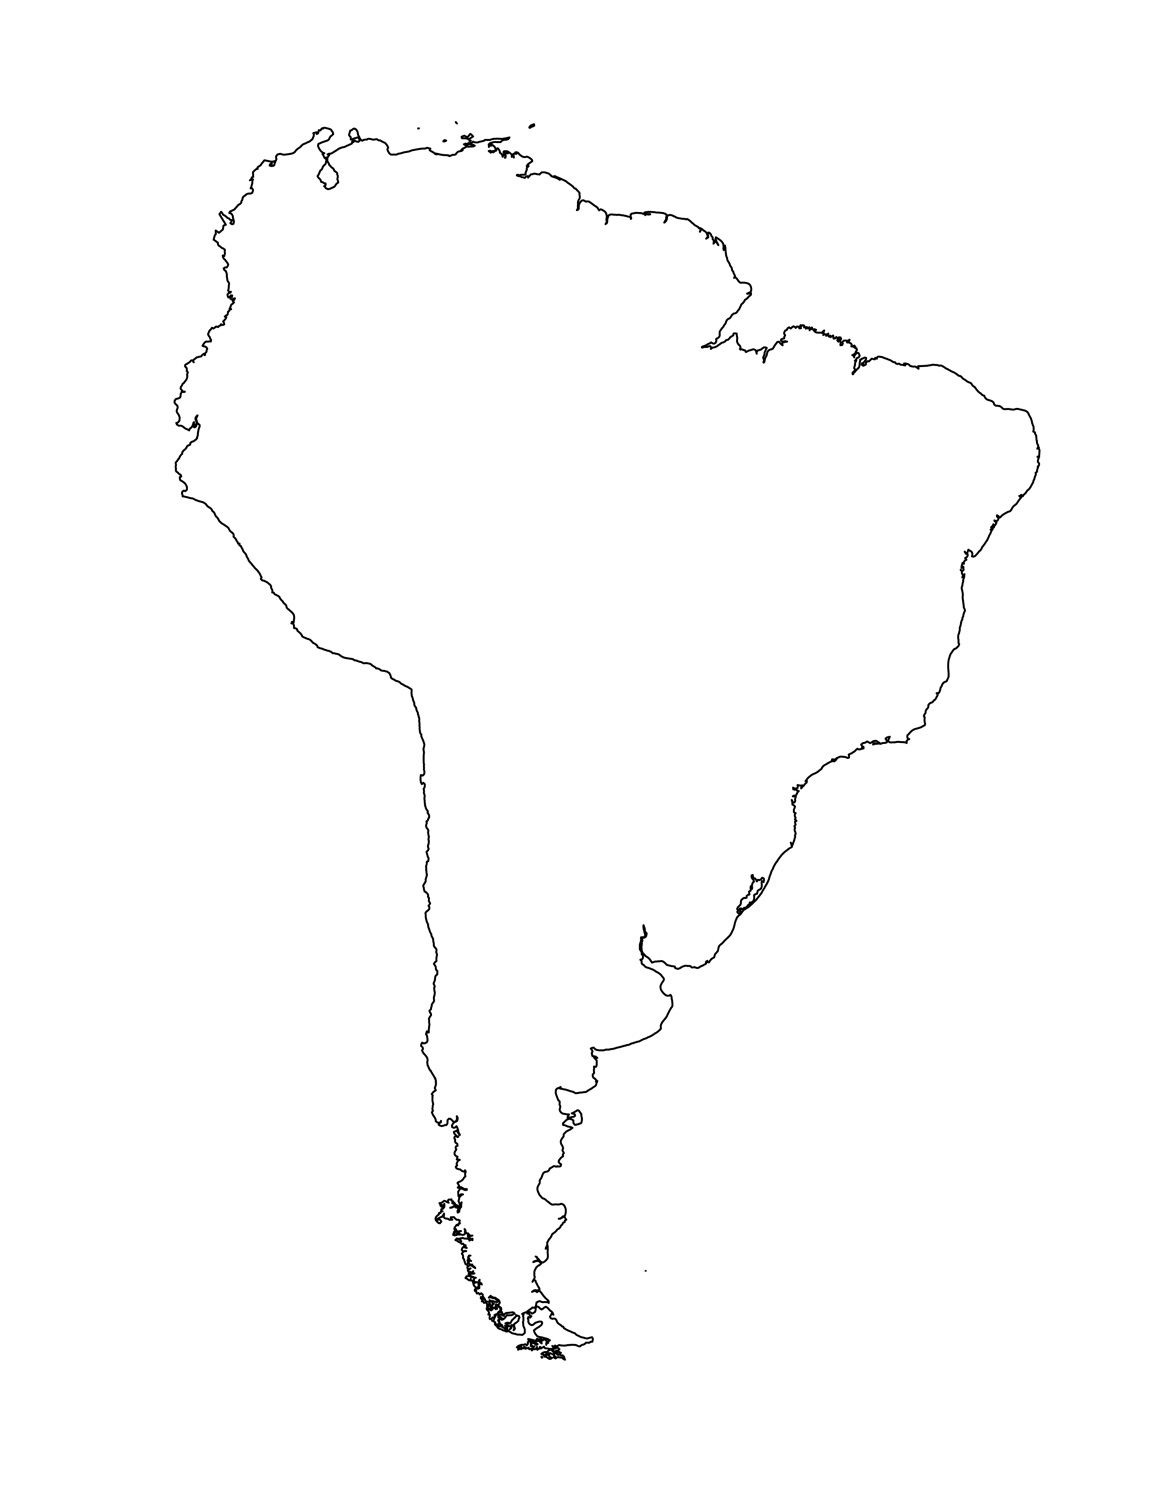 South America Continent Outline Map